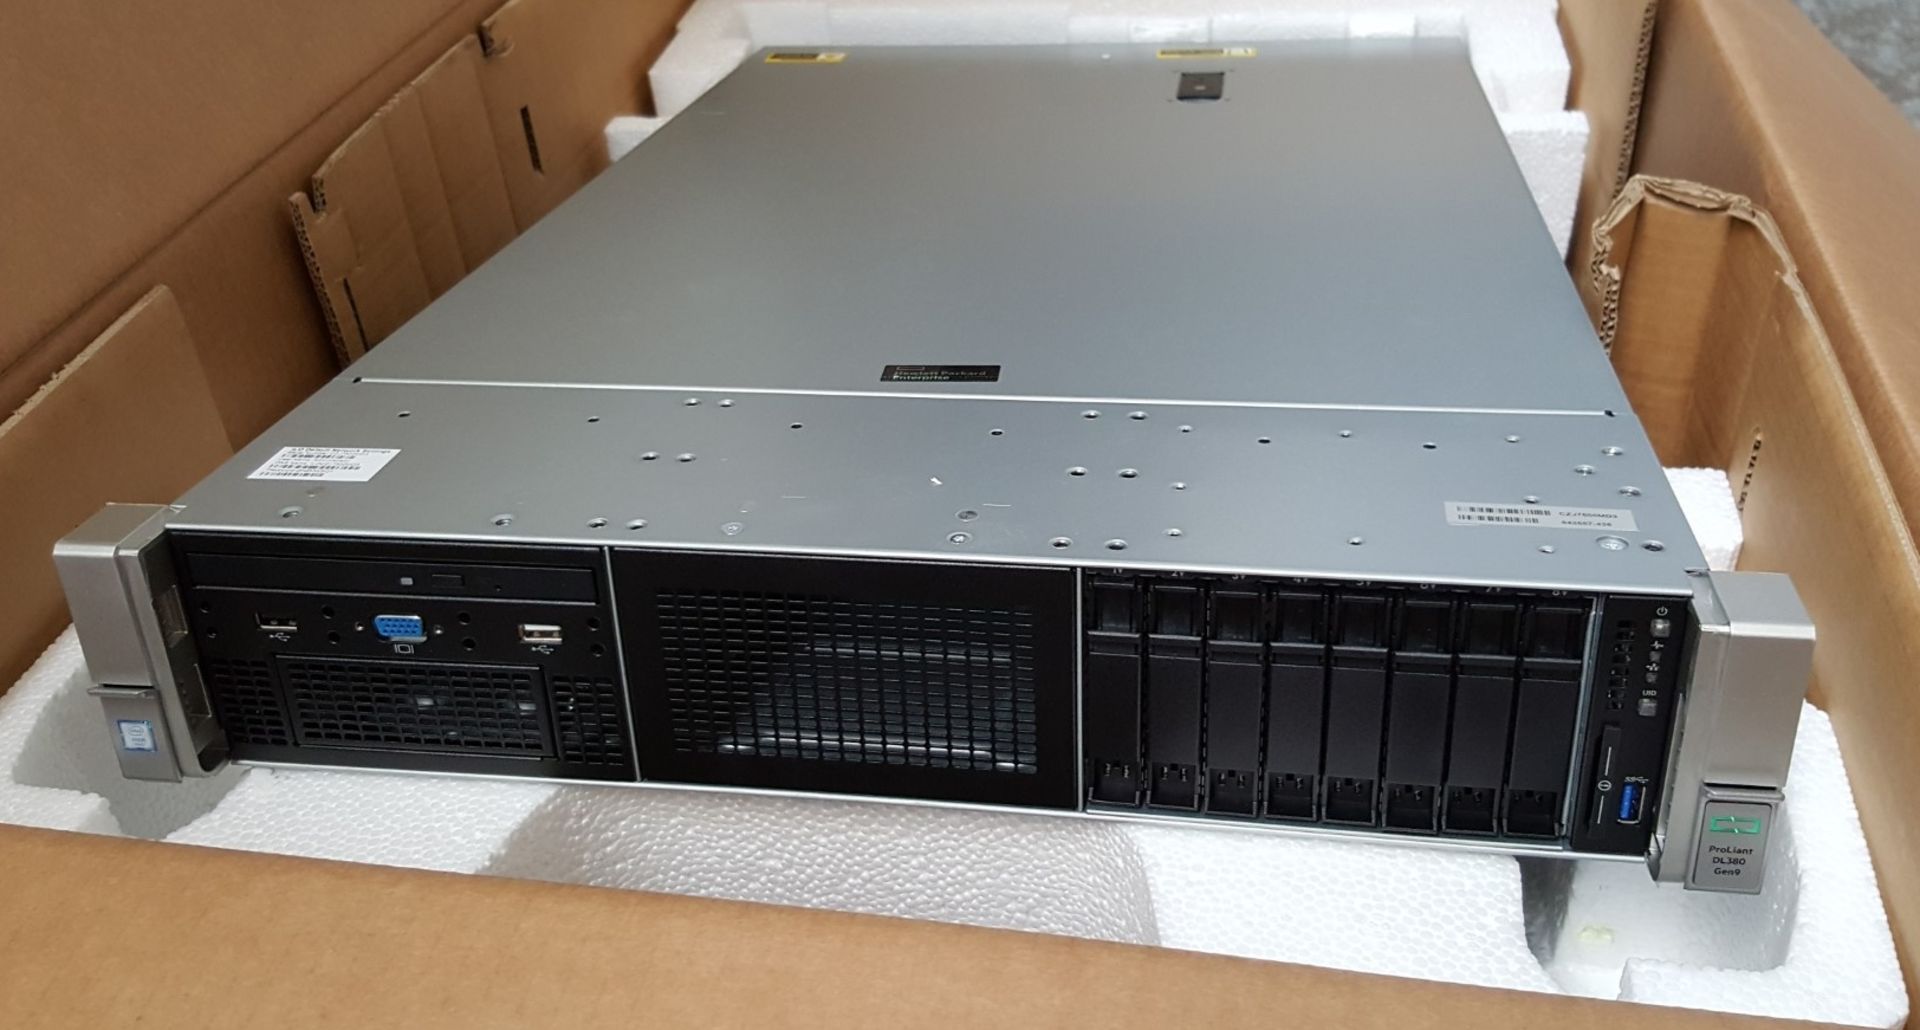 1 x HP ProLiant DL380 G9 Computer Server With Intel Xeon E5-2620V3 Six Core 2.4ghz Processor and